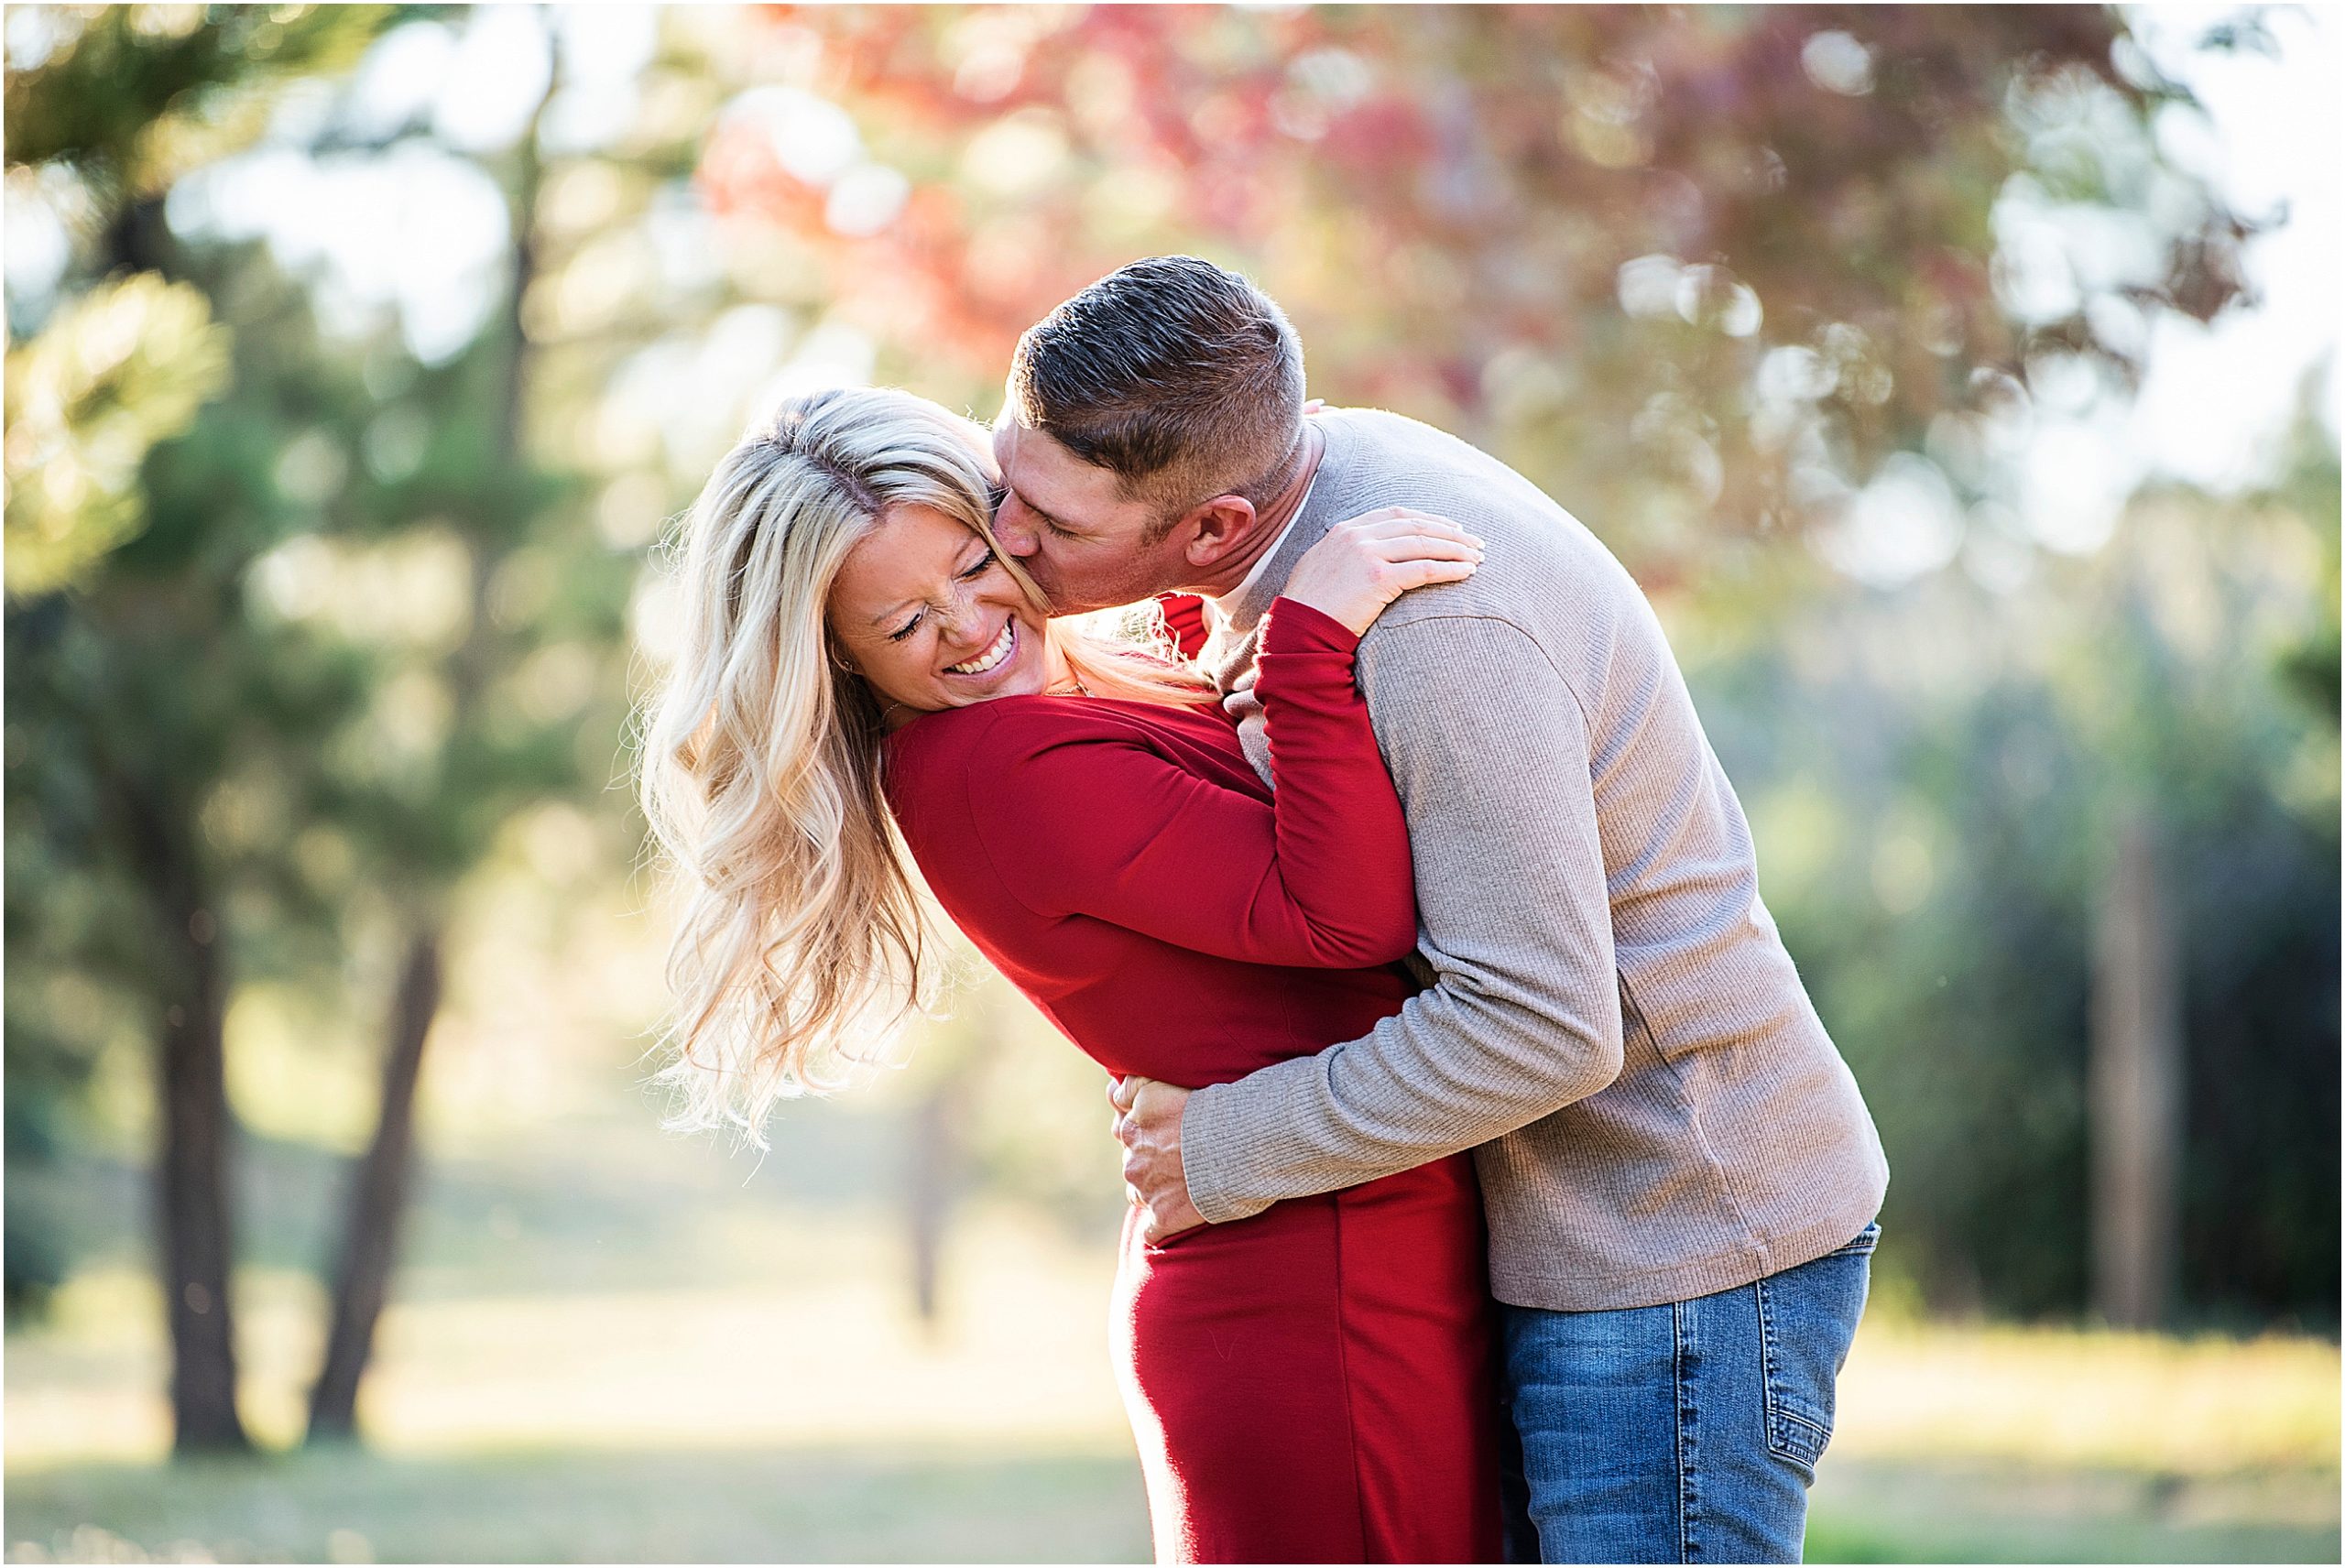 Jordan laughs while Brian holds her tight and kisses her cheek with red fall leaves behind them.